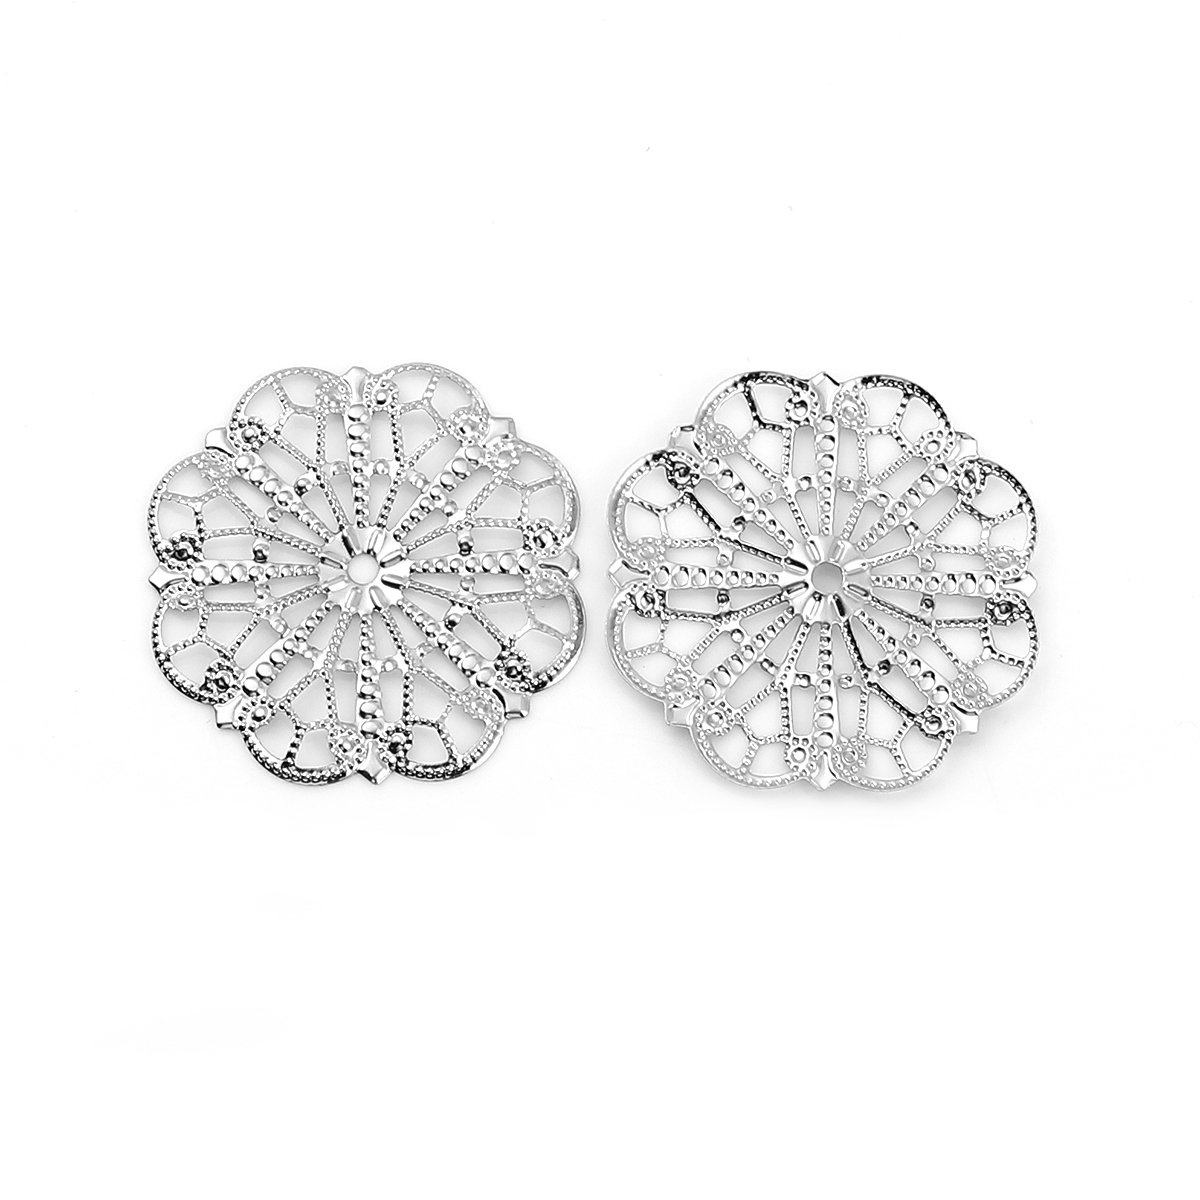 Picture of Iron Based Alloy Filigree Stamping Embellishments Flower Silver Tone 41mm(1 5/8") x 41mm(1 5/8"), 50 PCs